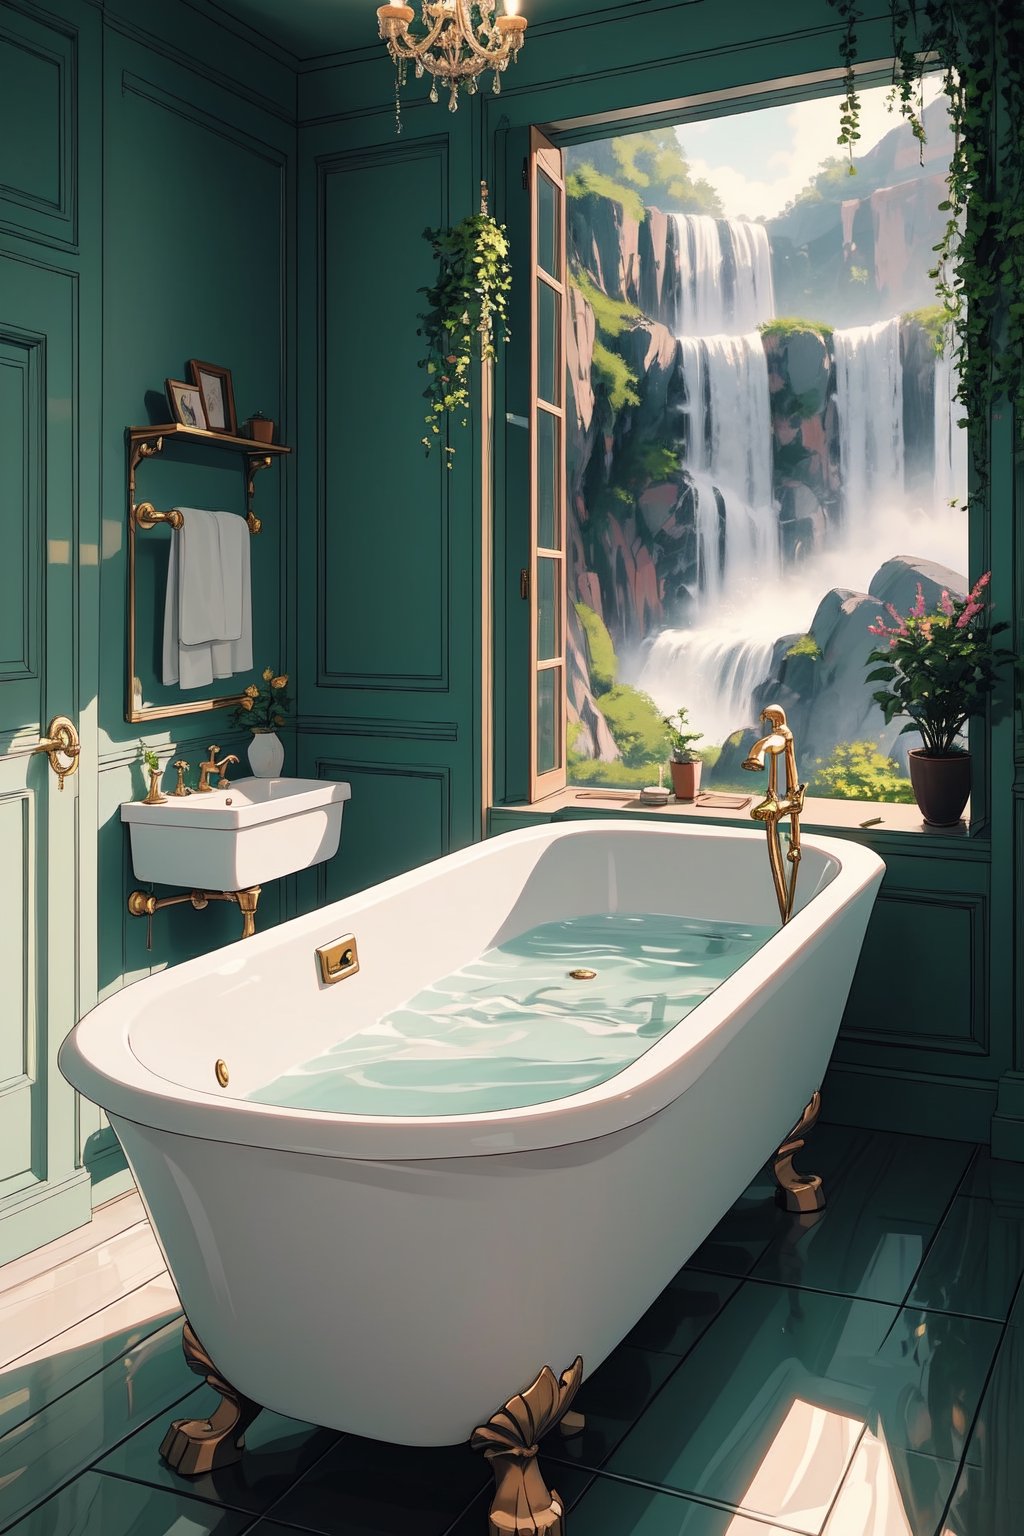 A large and airy bathroom with a freestanding bathtub in the center of the room. The bathtub is made of natural stone and has a built-in waterfall feature. The walls of the bathroom are covered in floor-to-ceiling windows, which offer stunning views of the surrounding forest. The bathroom is also decorated with lush plants and exotic flowers. The overall atmosphere of the bathroom is one of luxury, relaxation, and peace.